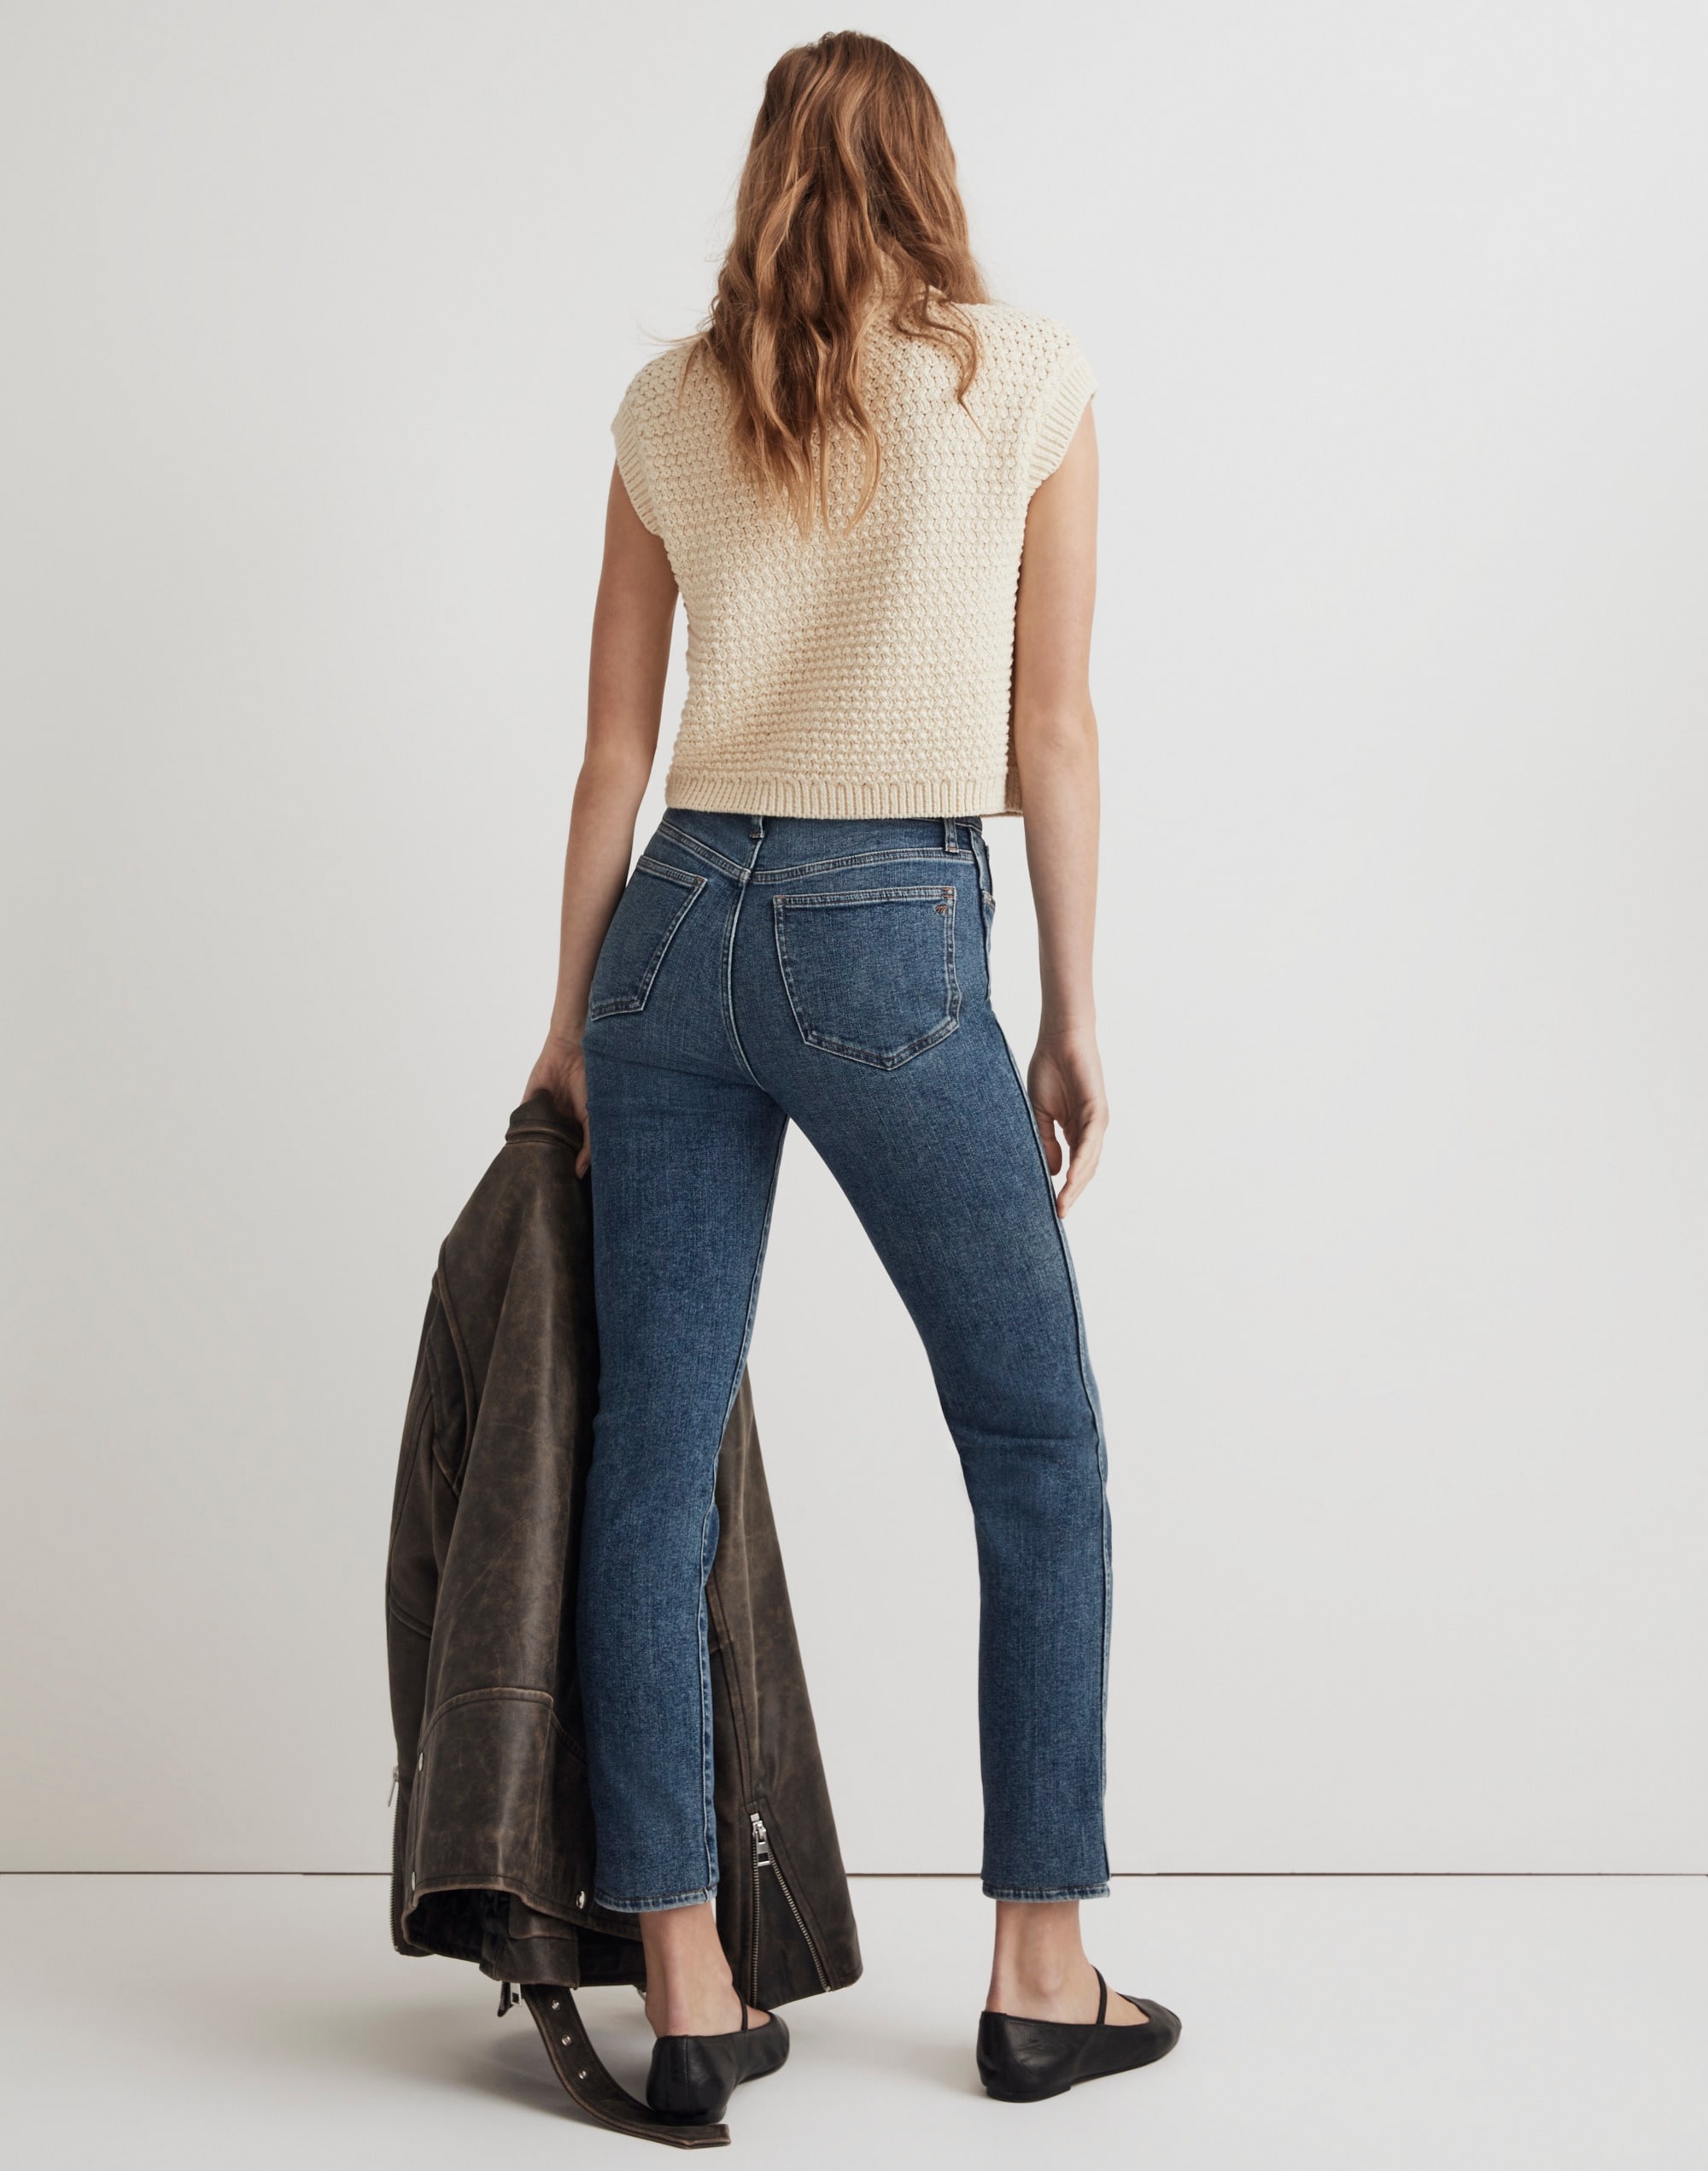 Winter Essentials from Everlane and Shopbop - Jeans and a Teacup